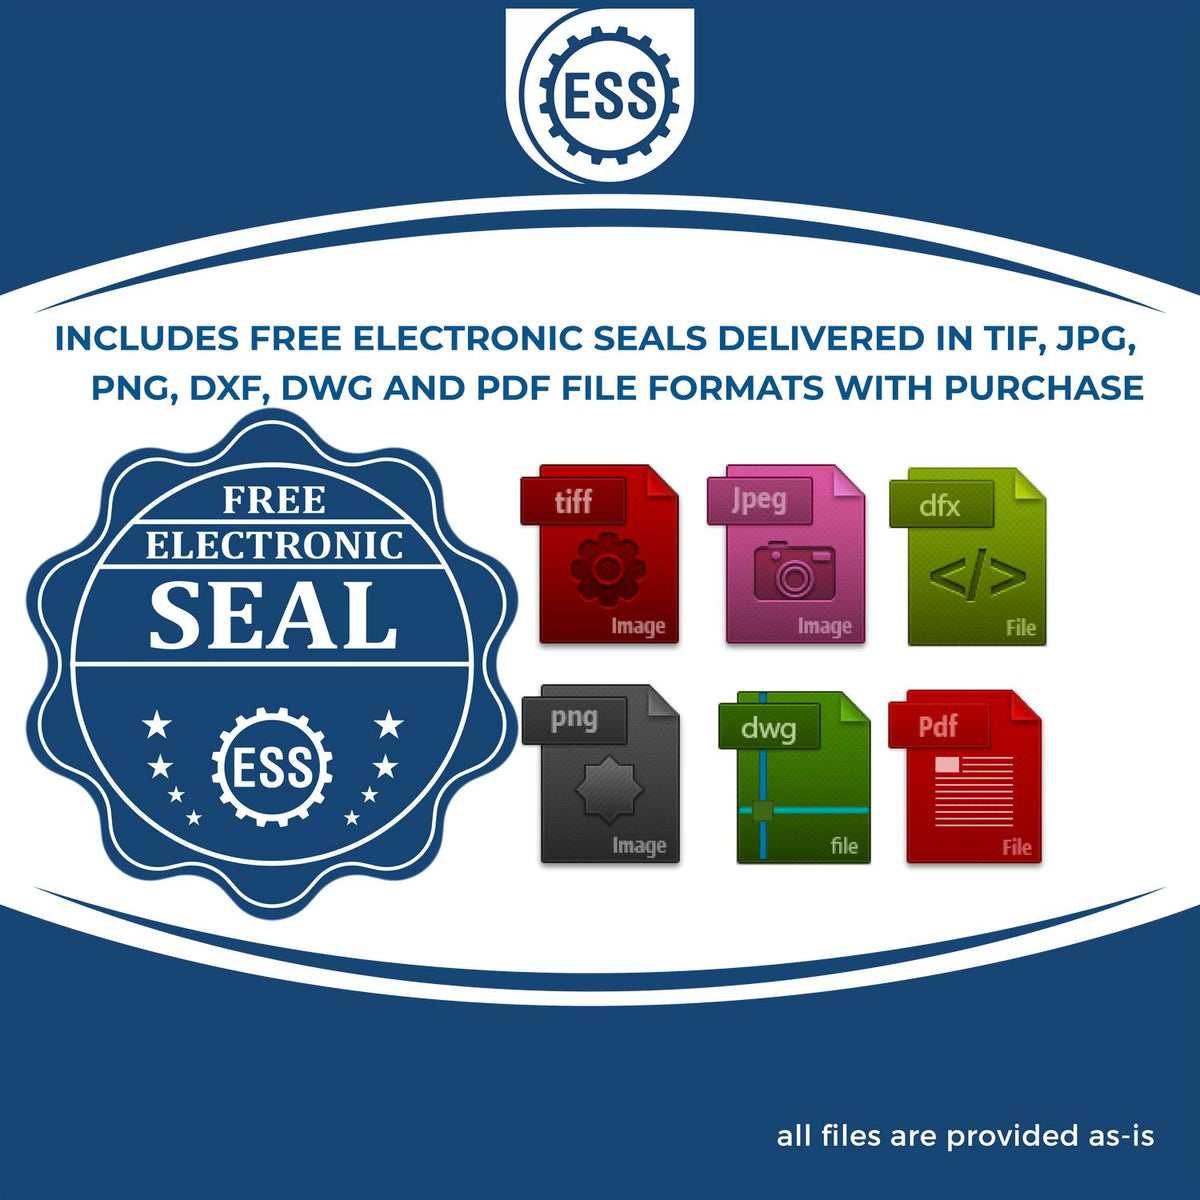 An infographic for the free electronic seal for the Heavy-Duty Massachusetts Rectangular Notary Stamp illustrating the different file type icons such as DXF, DWG, TIF, JPG and PNG.